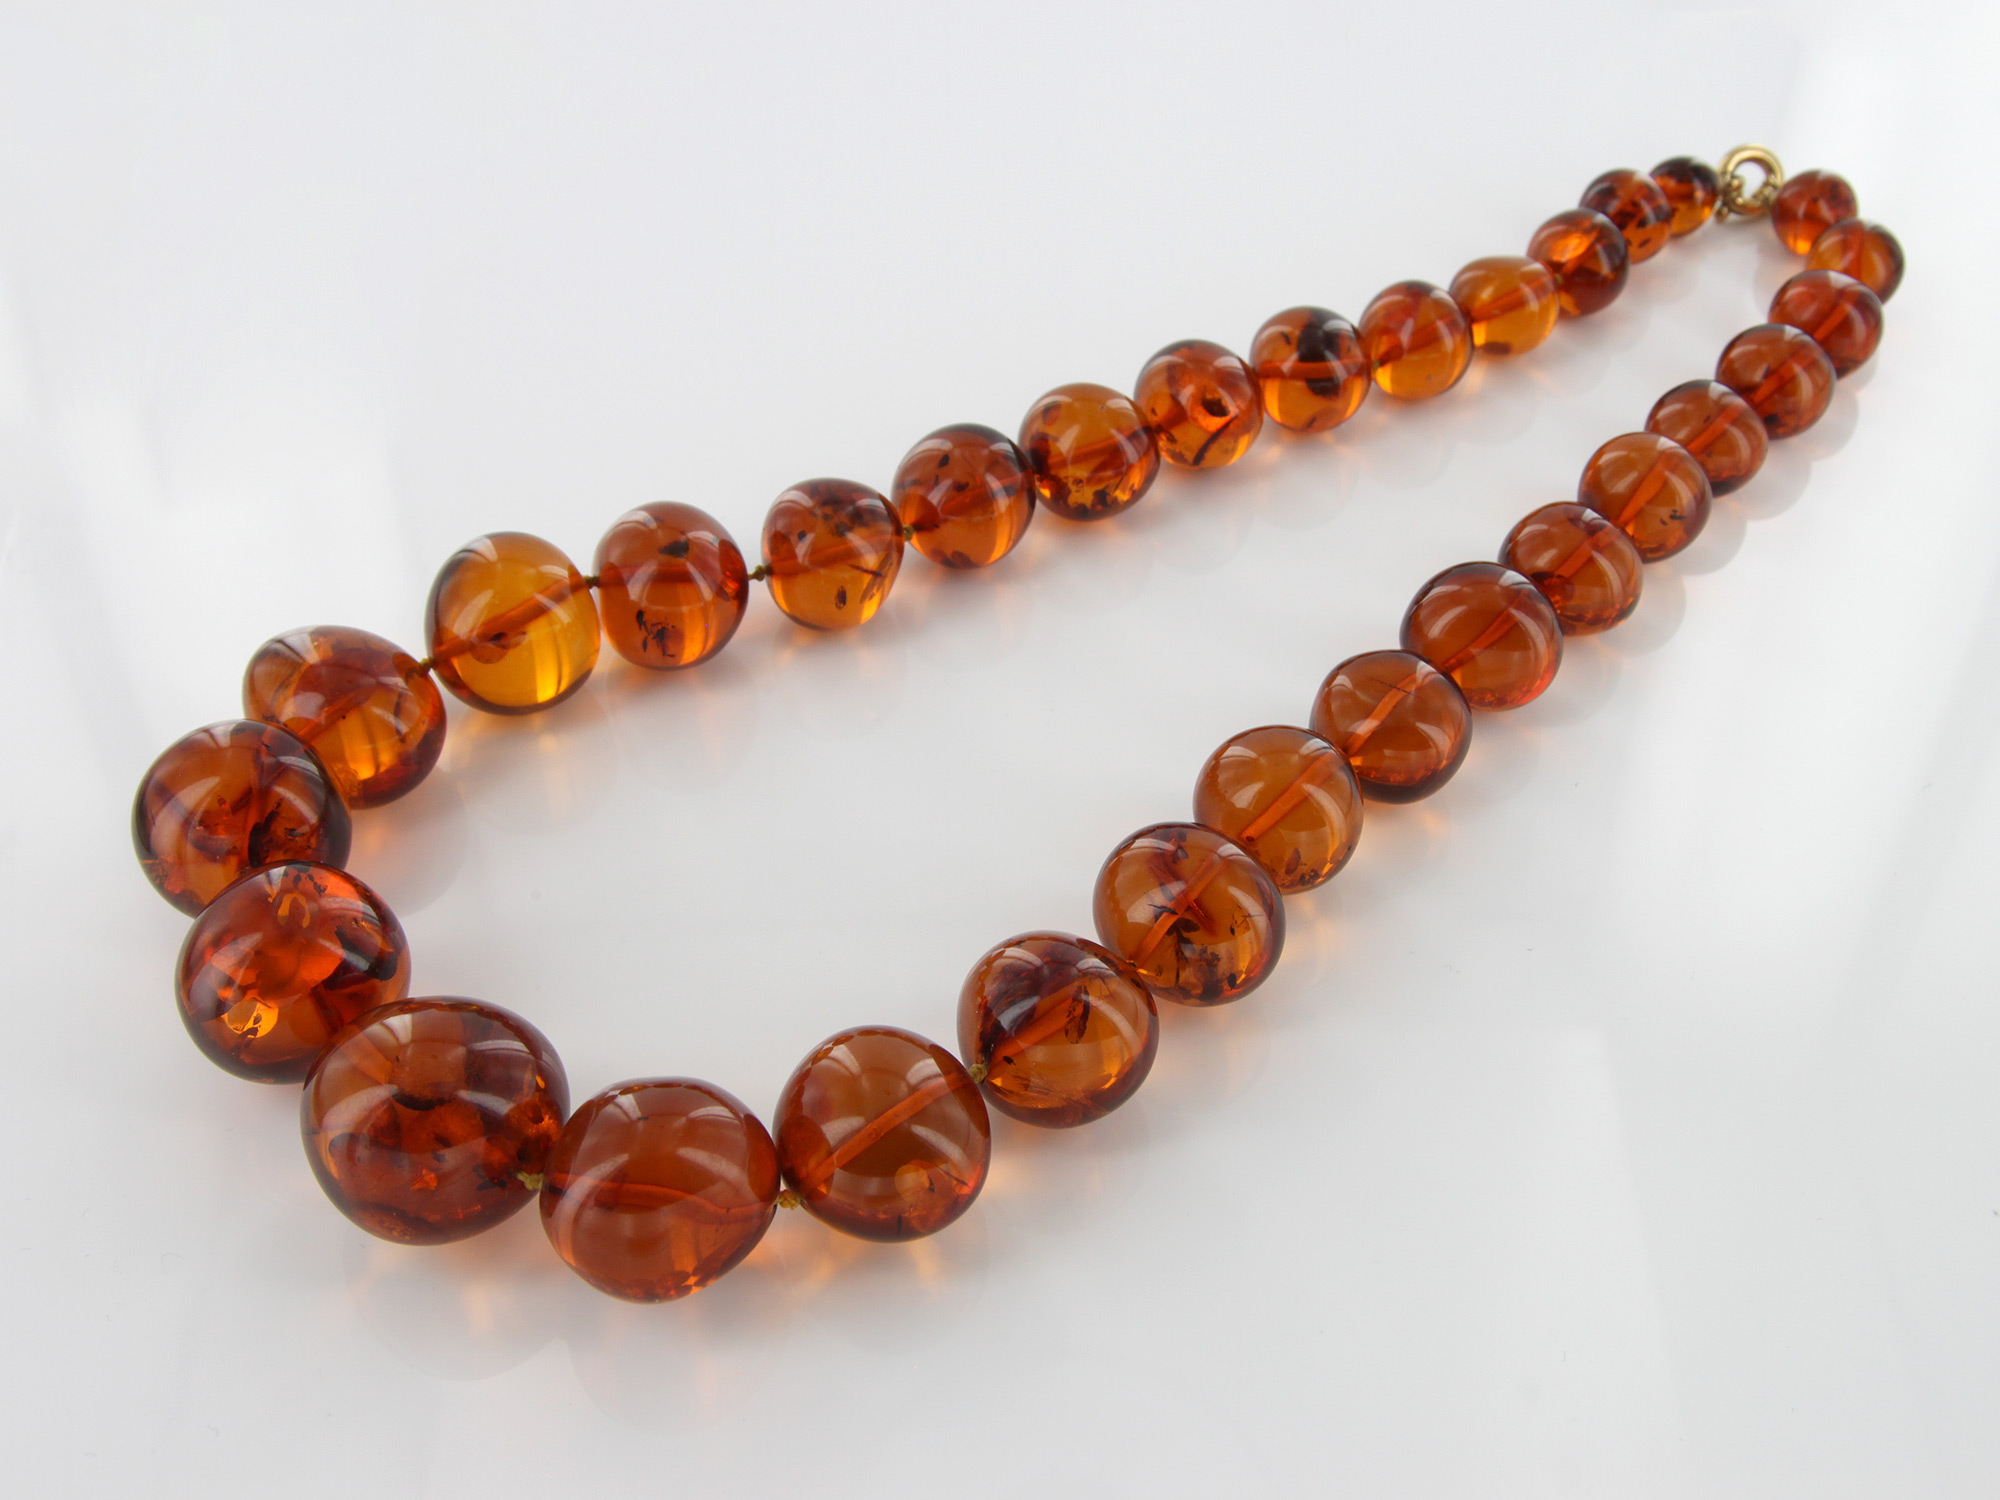 Baltic amber necklace | Amber bead necklace | Jethro Marles